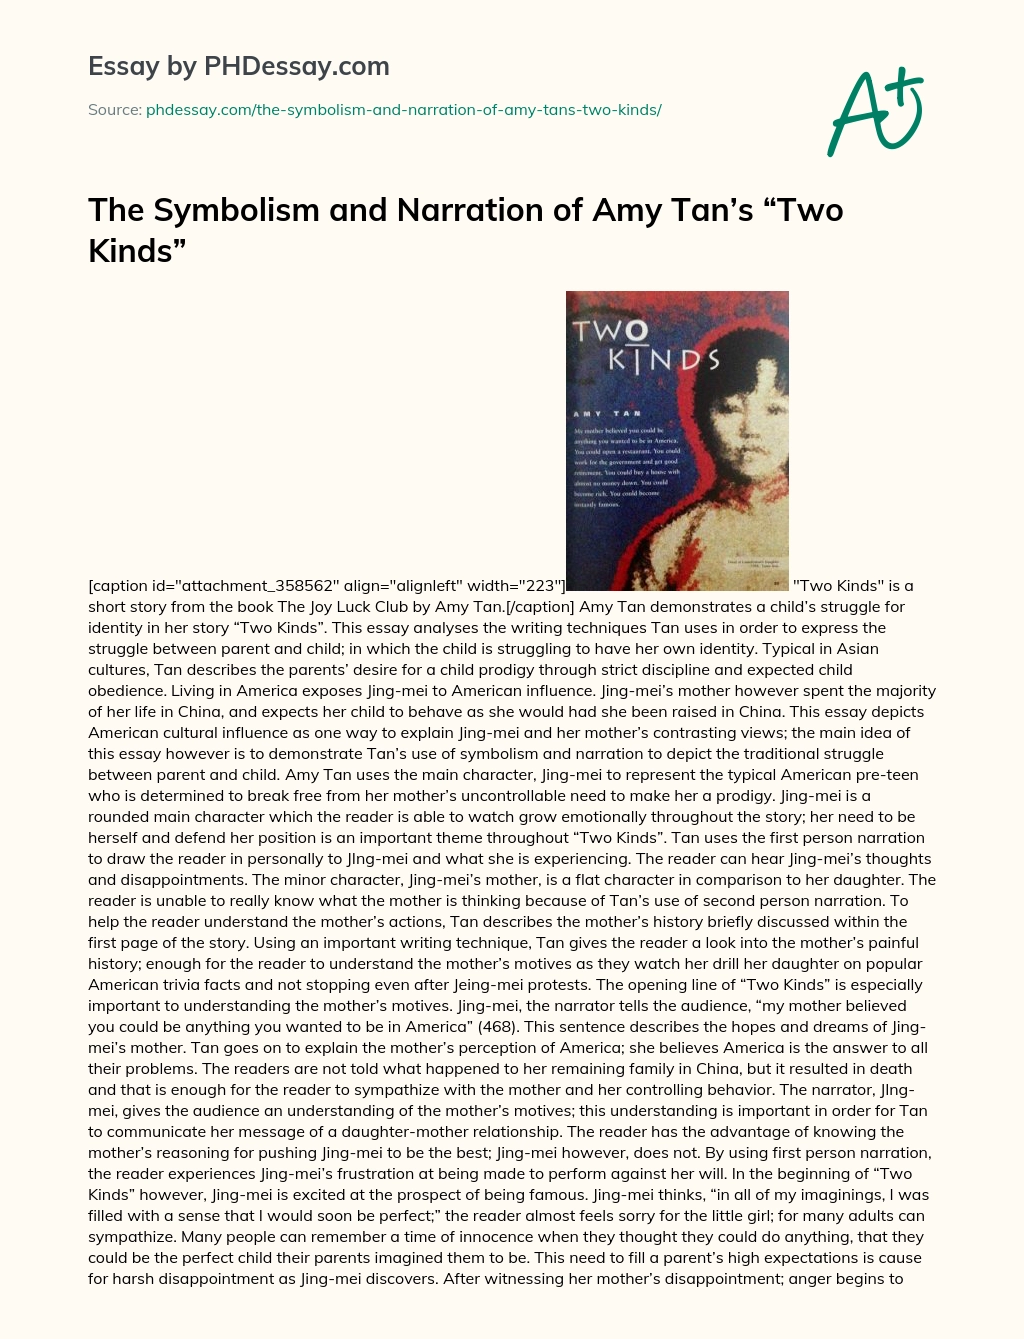 The Symbolism and Narration of Amy Tan’s “Two Kinds” essay